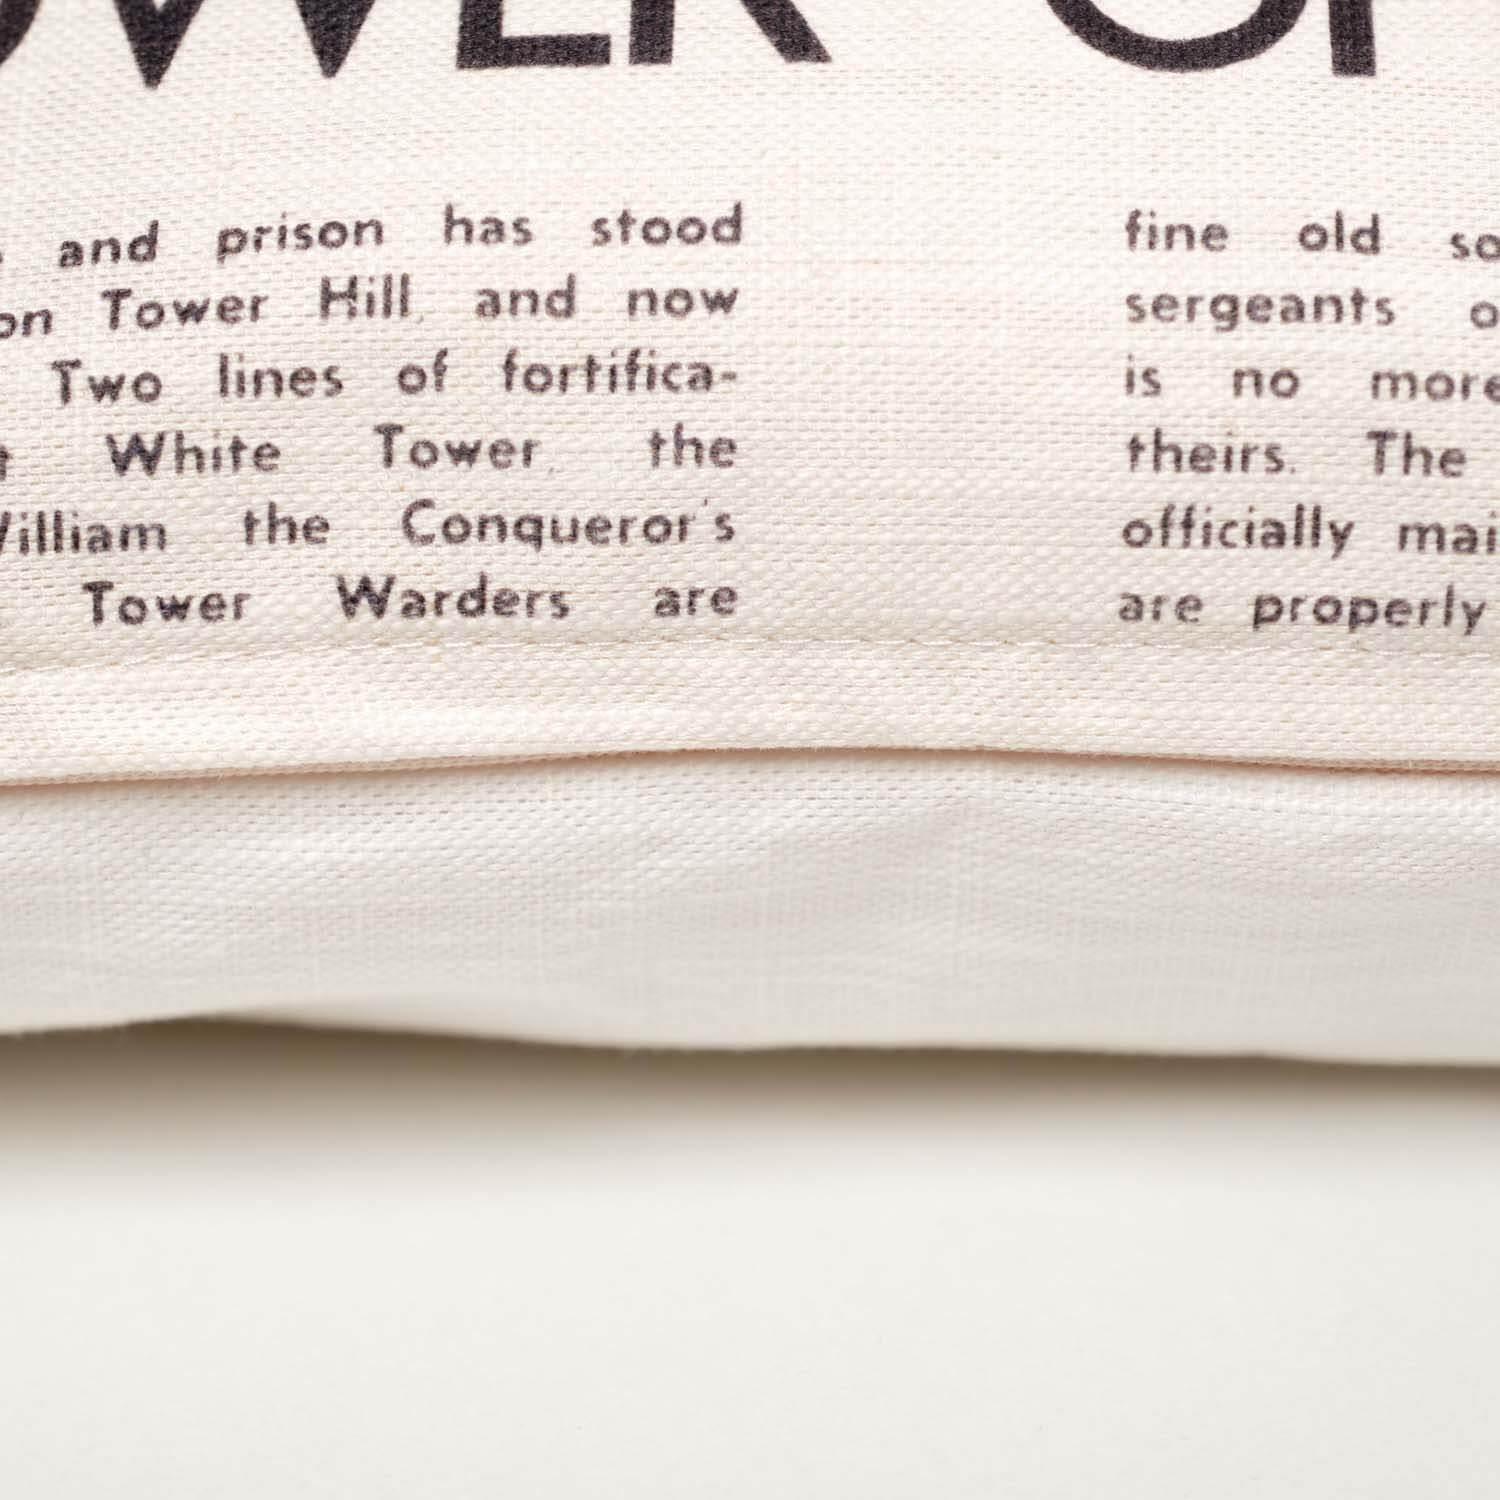 Steamship Routes - Associated Humber Lines LNER-LMS 1930 - National Railway Museum Cushion - Handmade Cushions UK - WeLoveCushions